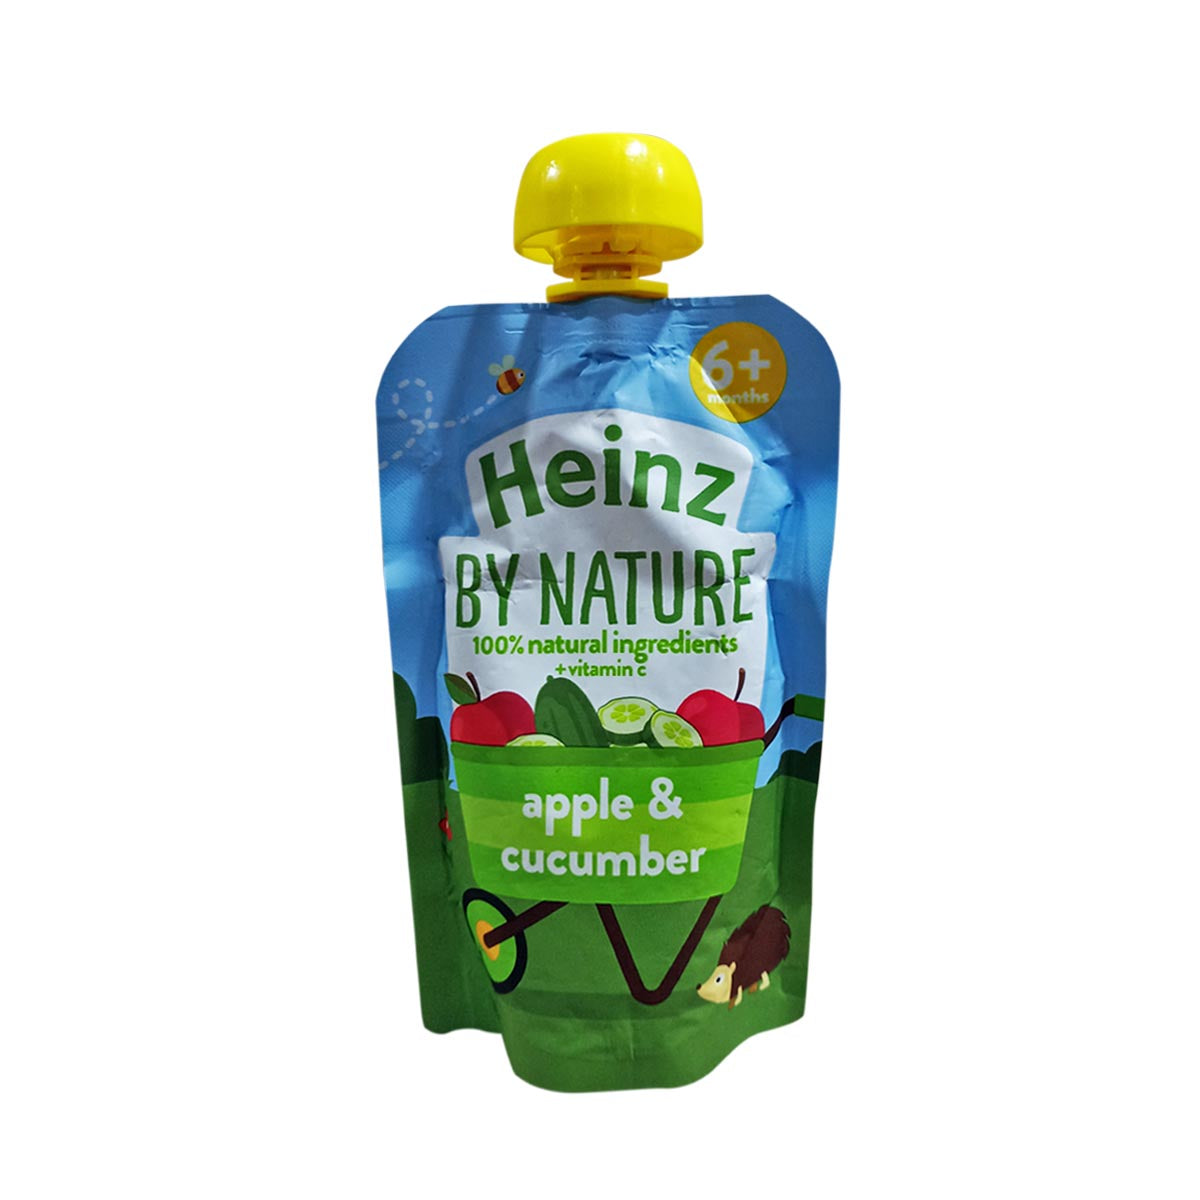 Heinz By Nature Apple & Cucumber Puree - 100g